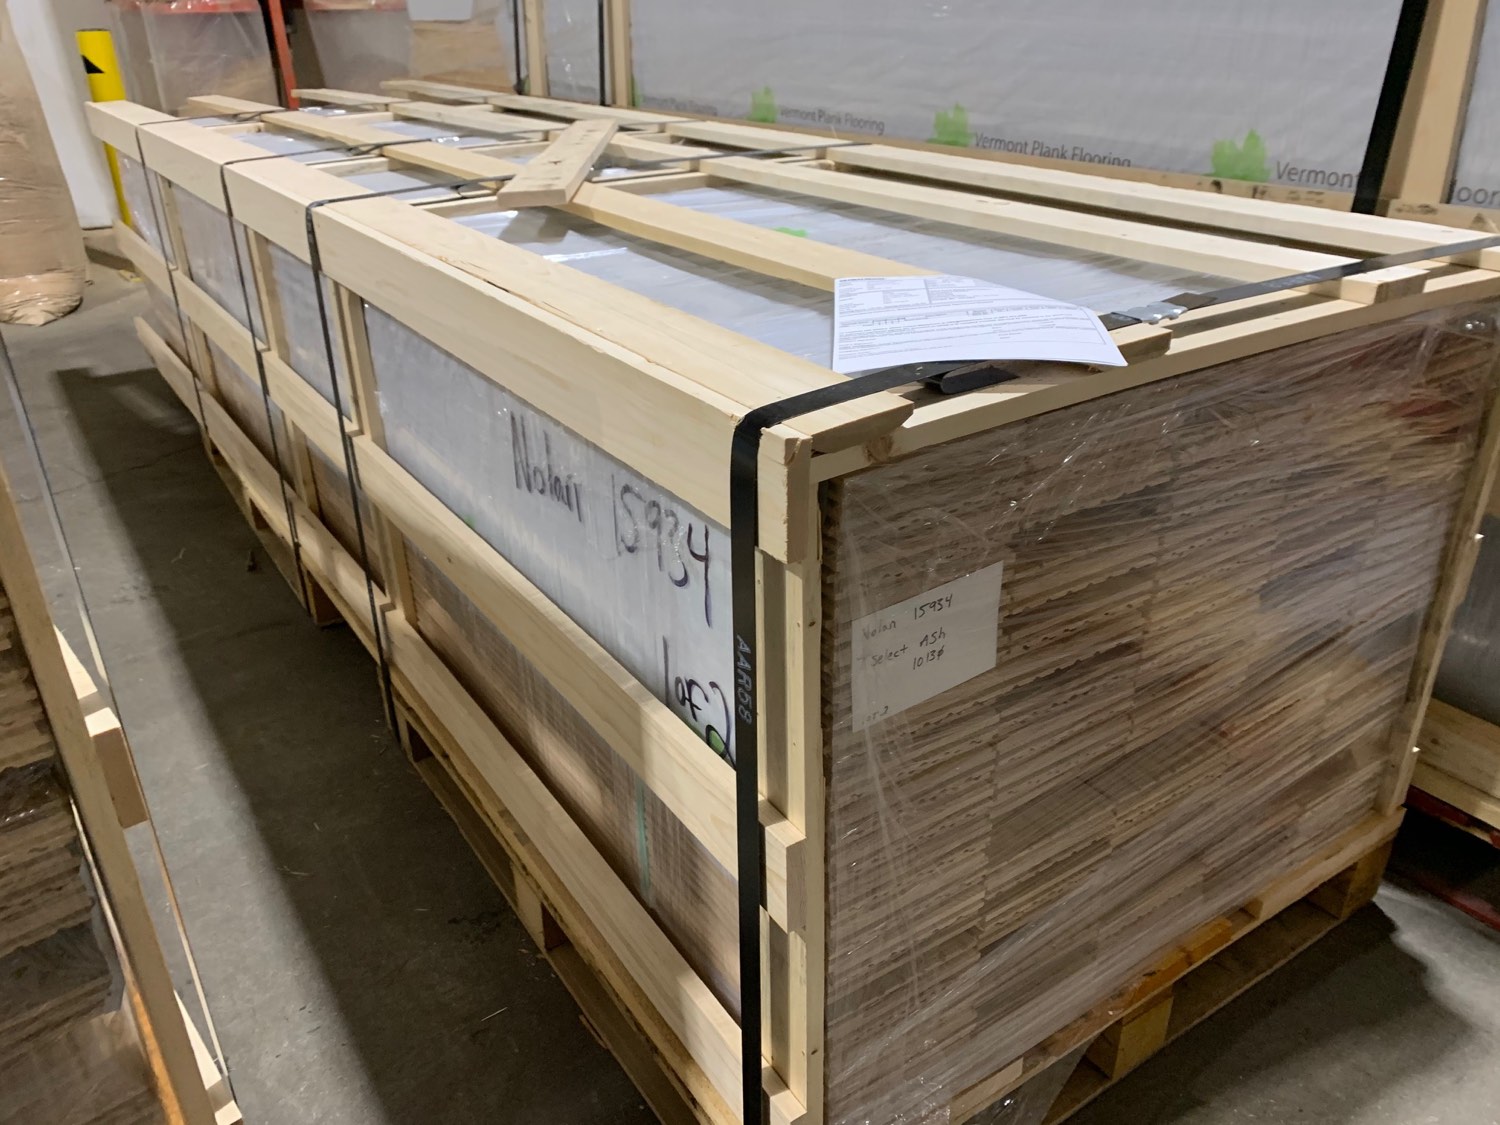 Vermont Plank Floor Crated Ready To Ship